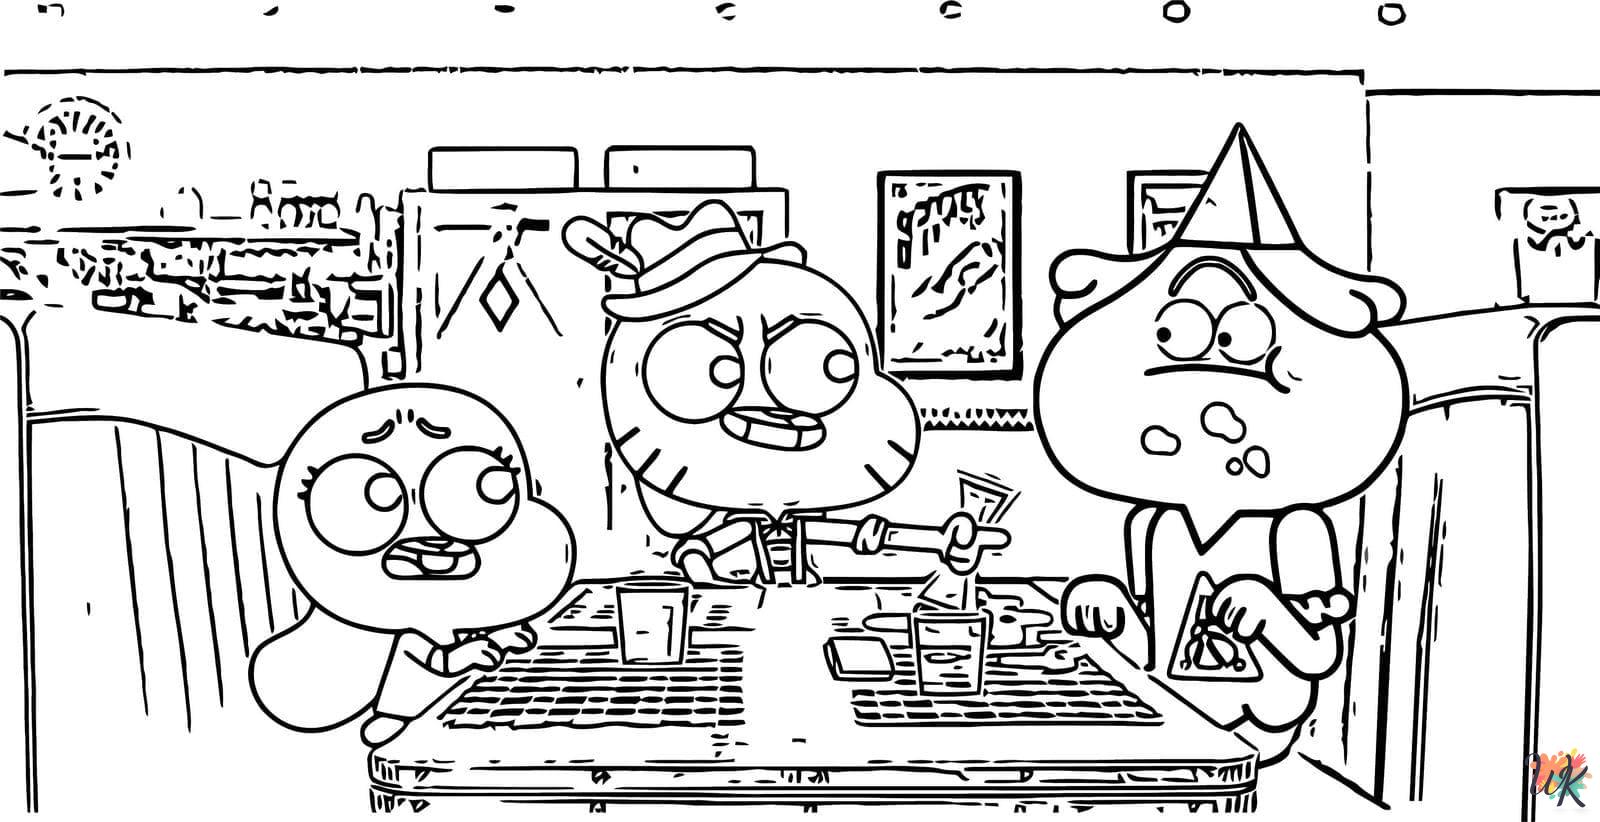 Gumball coloring pages for adults easy 2